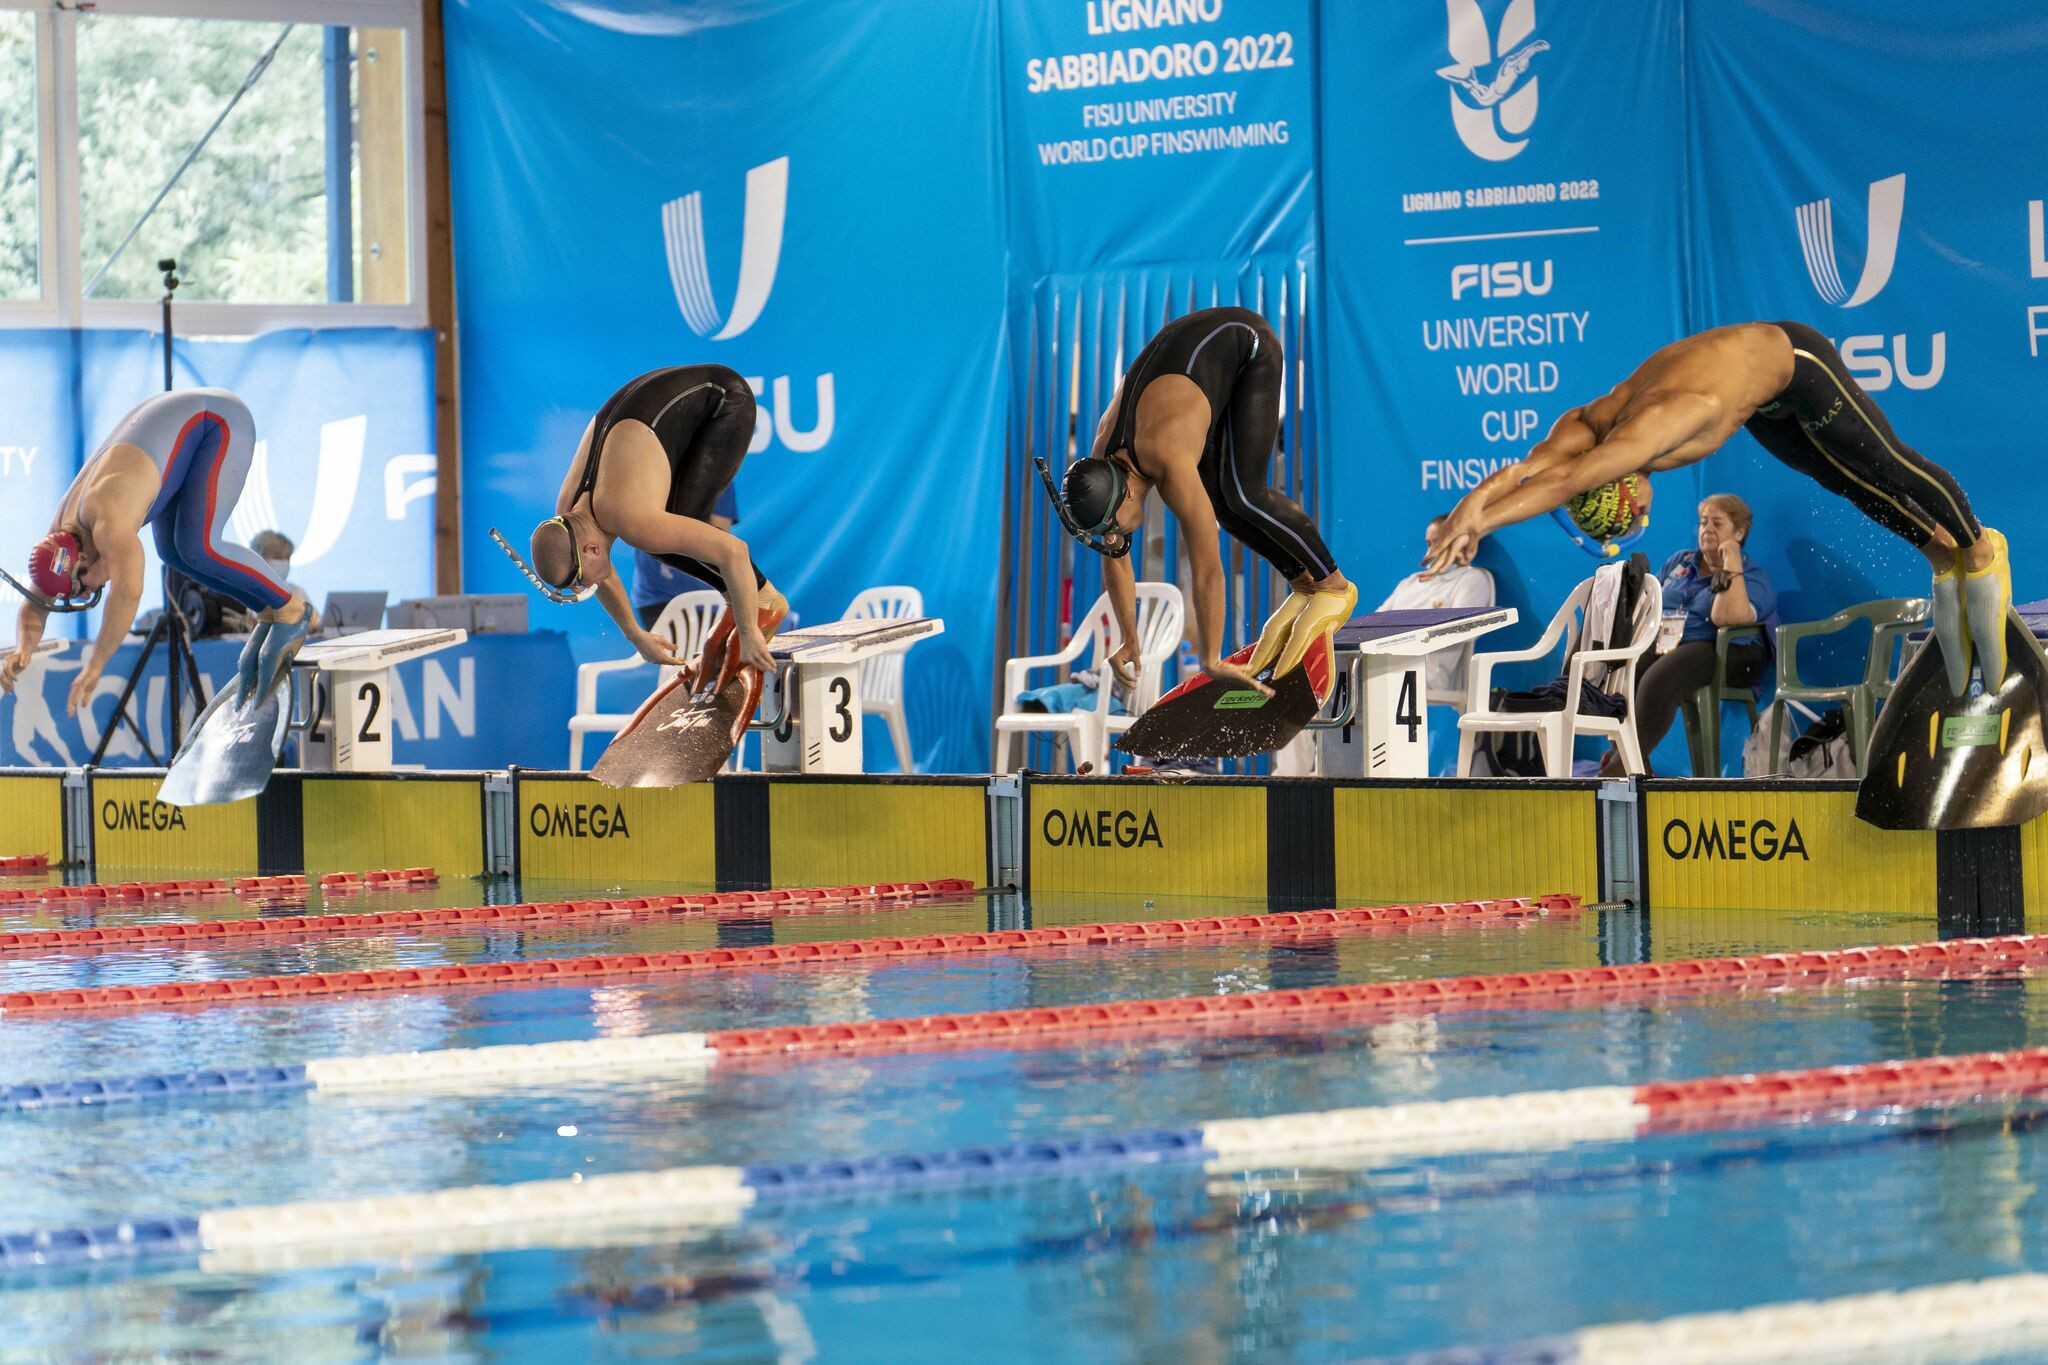 The FISU Finswimming World Cup took place at Lignano Sabbiadoro with Italy topping the medal table ©FISU